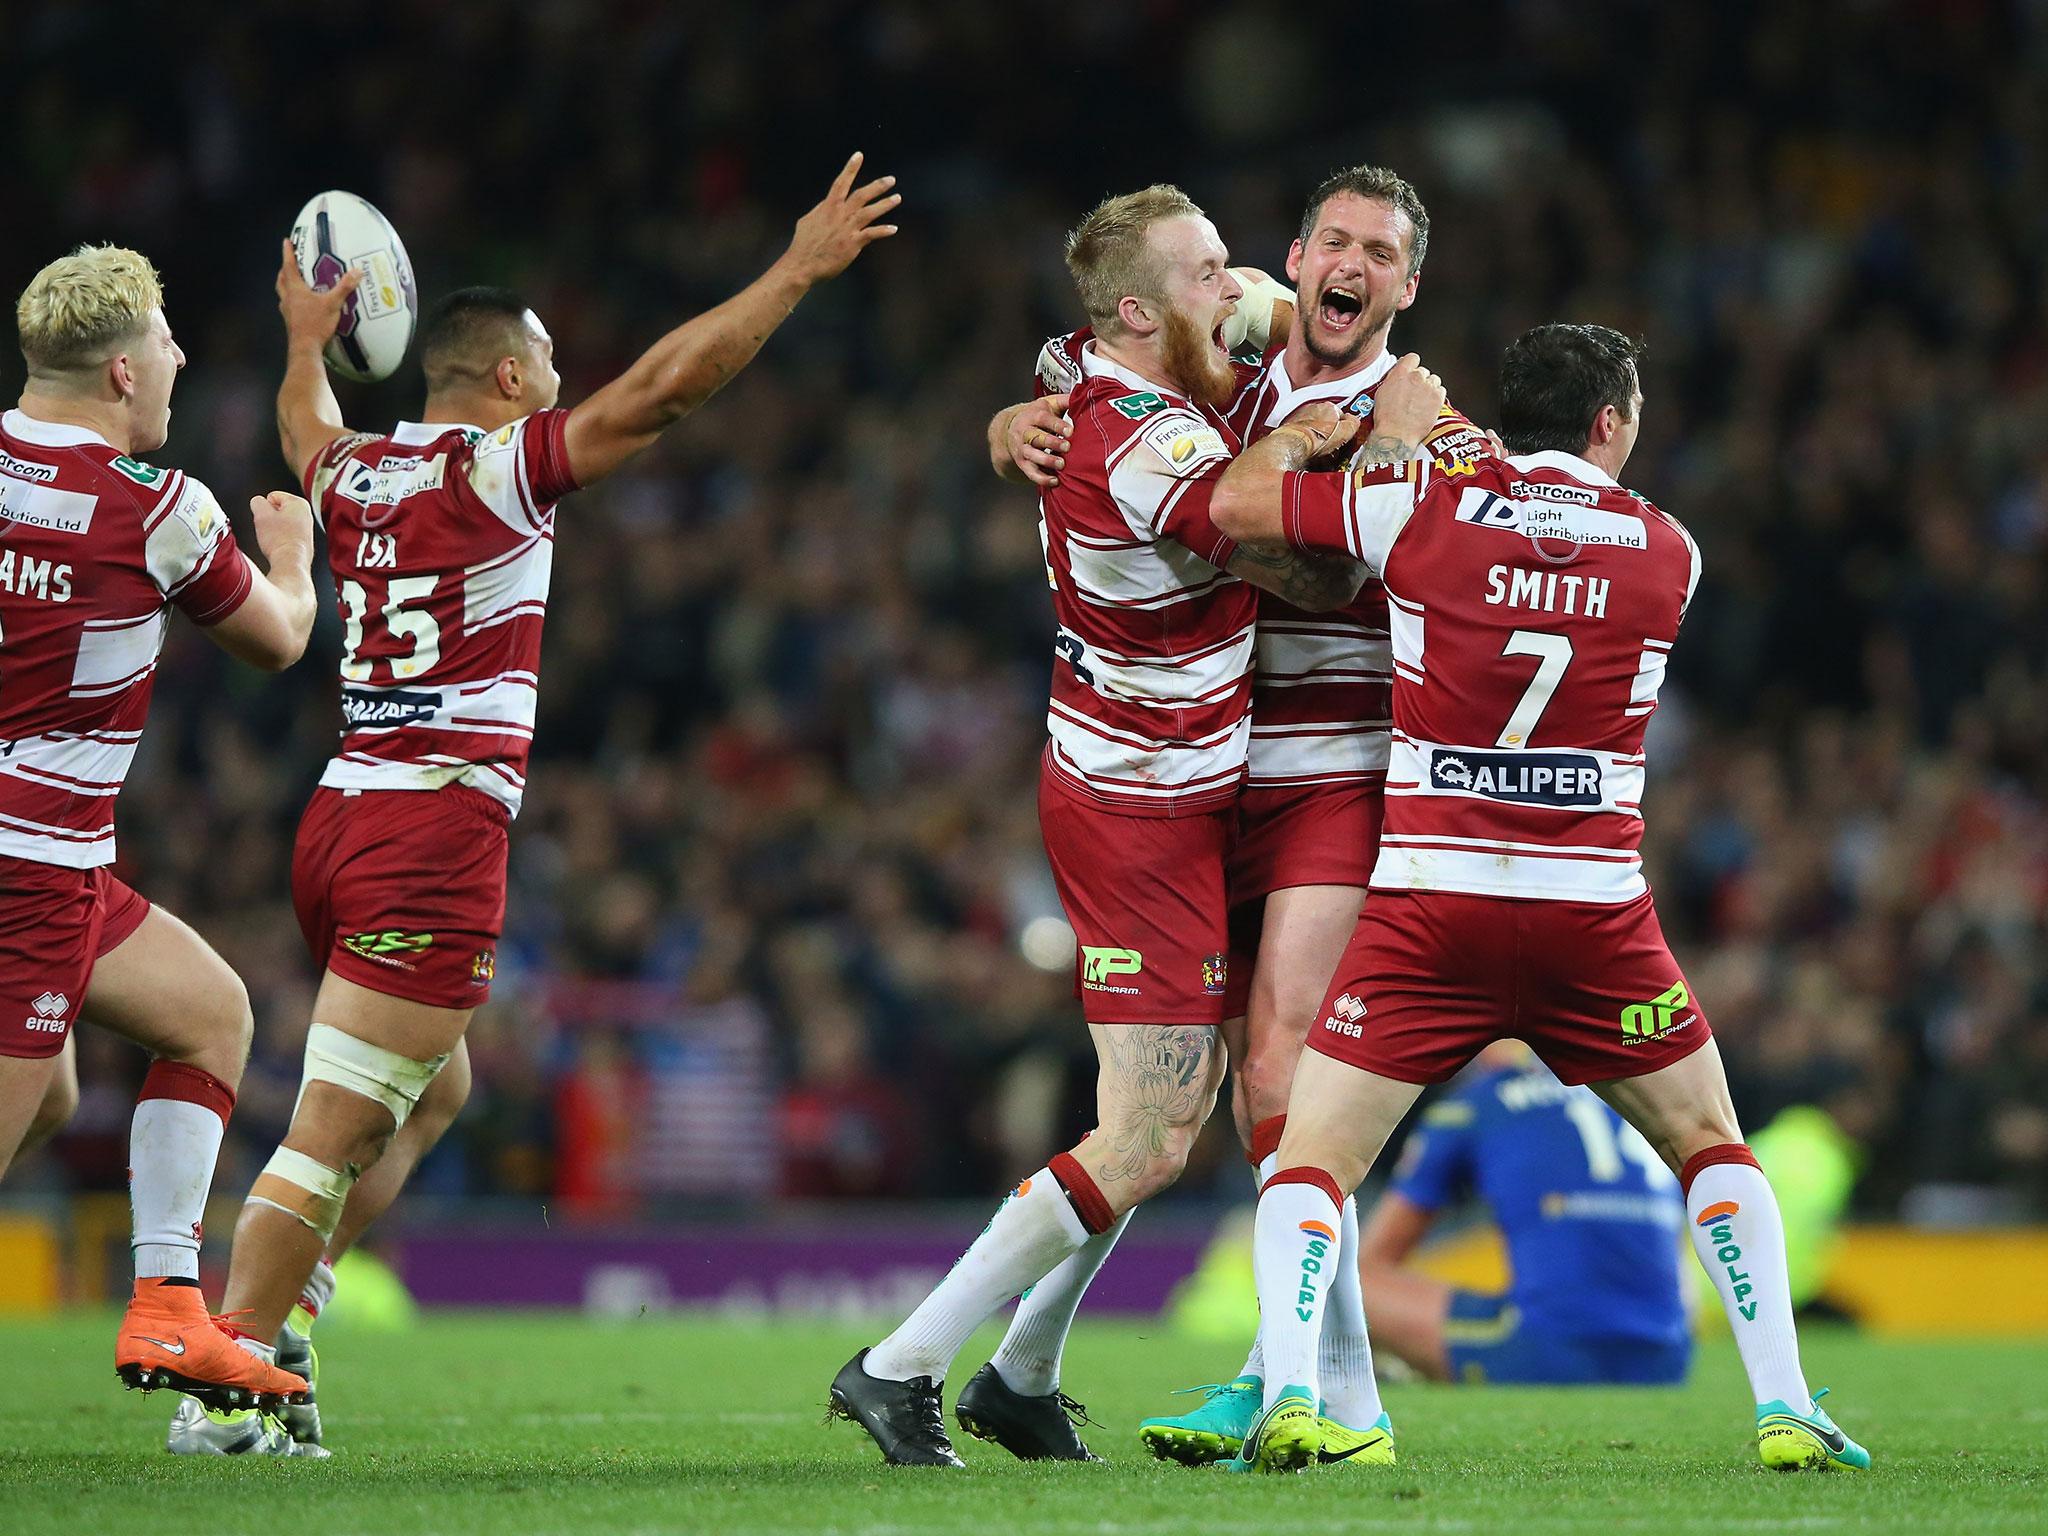 &#13;
Wigan, the British Champions, will be looking to their past for inspiration against their Australian opponents &#13;